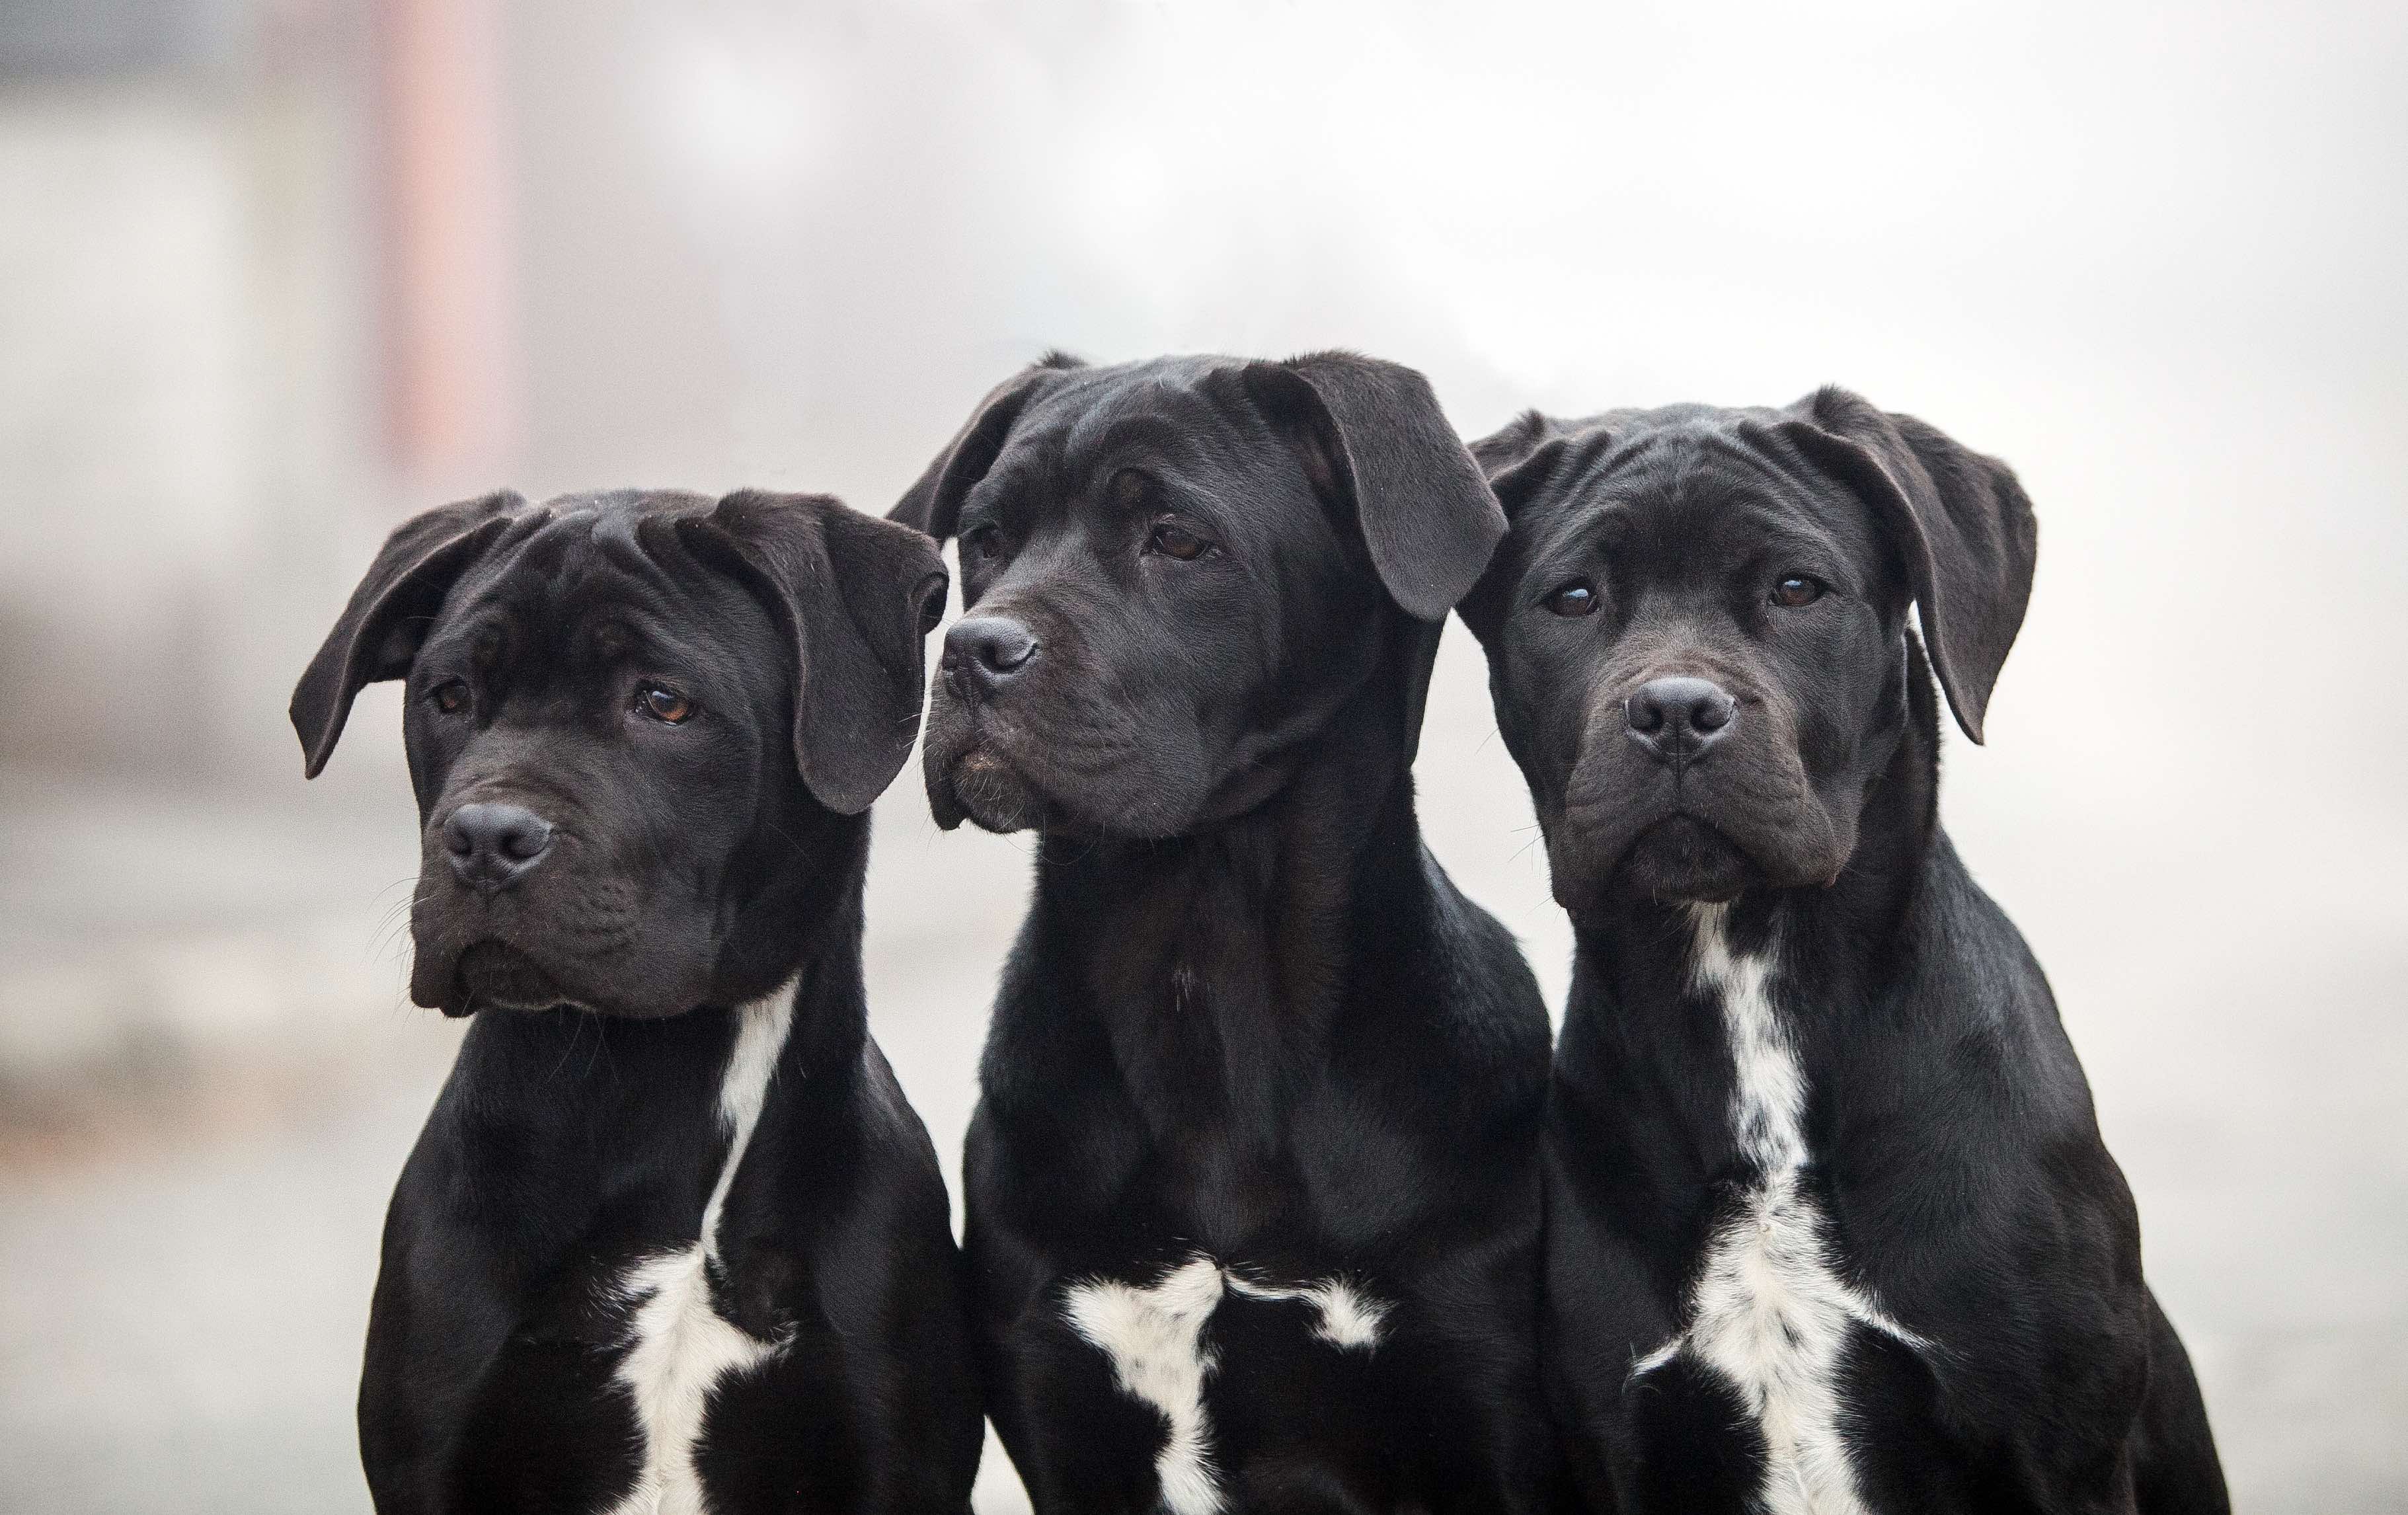 three cane corso puppies sitting together